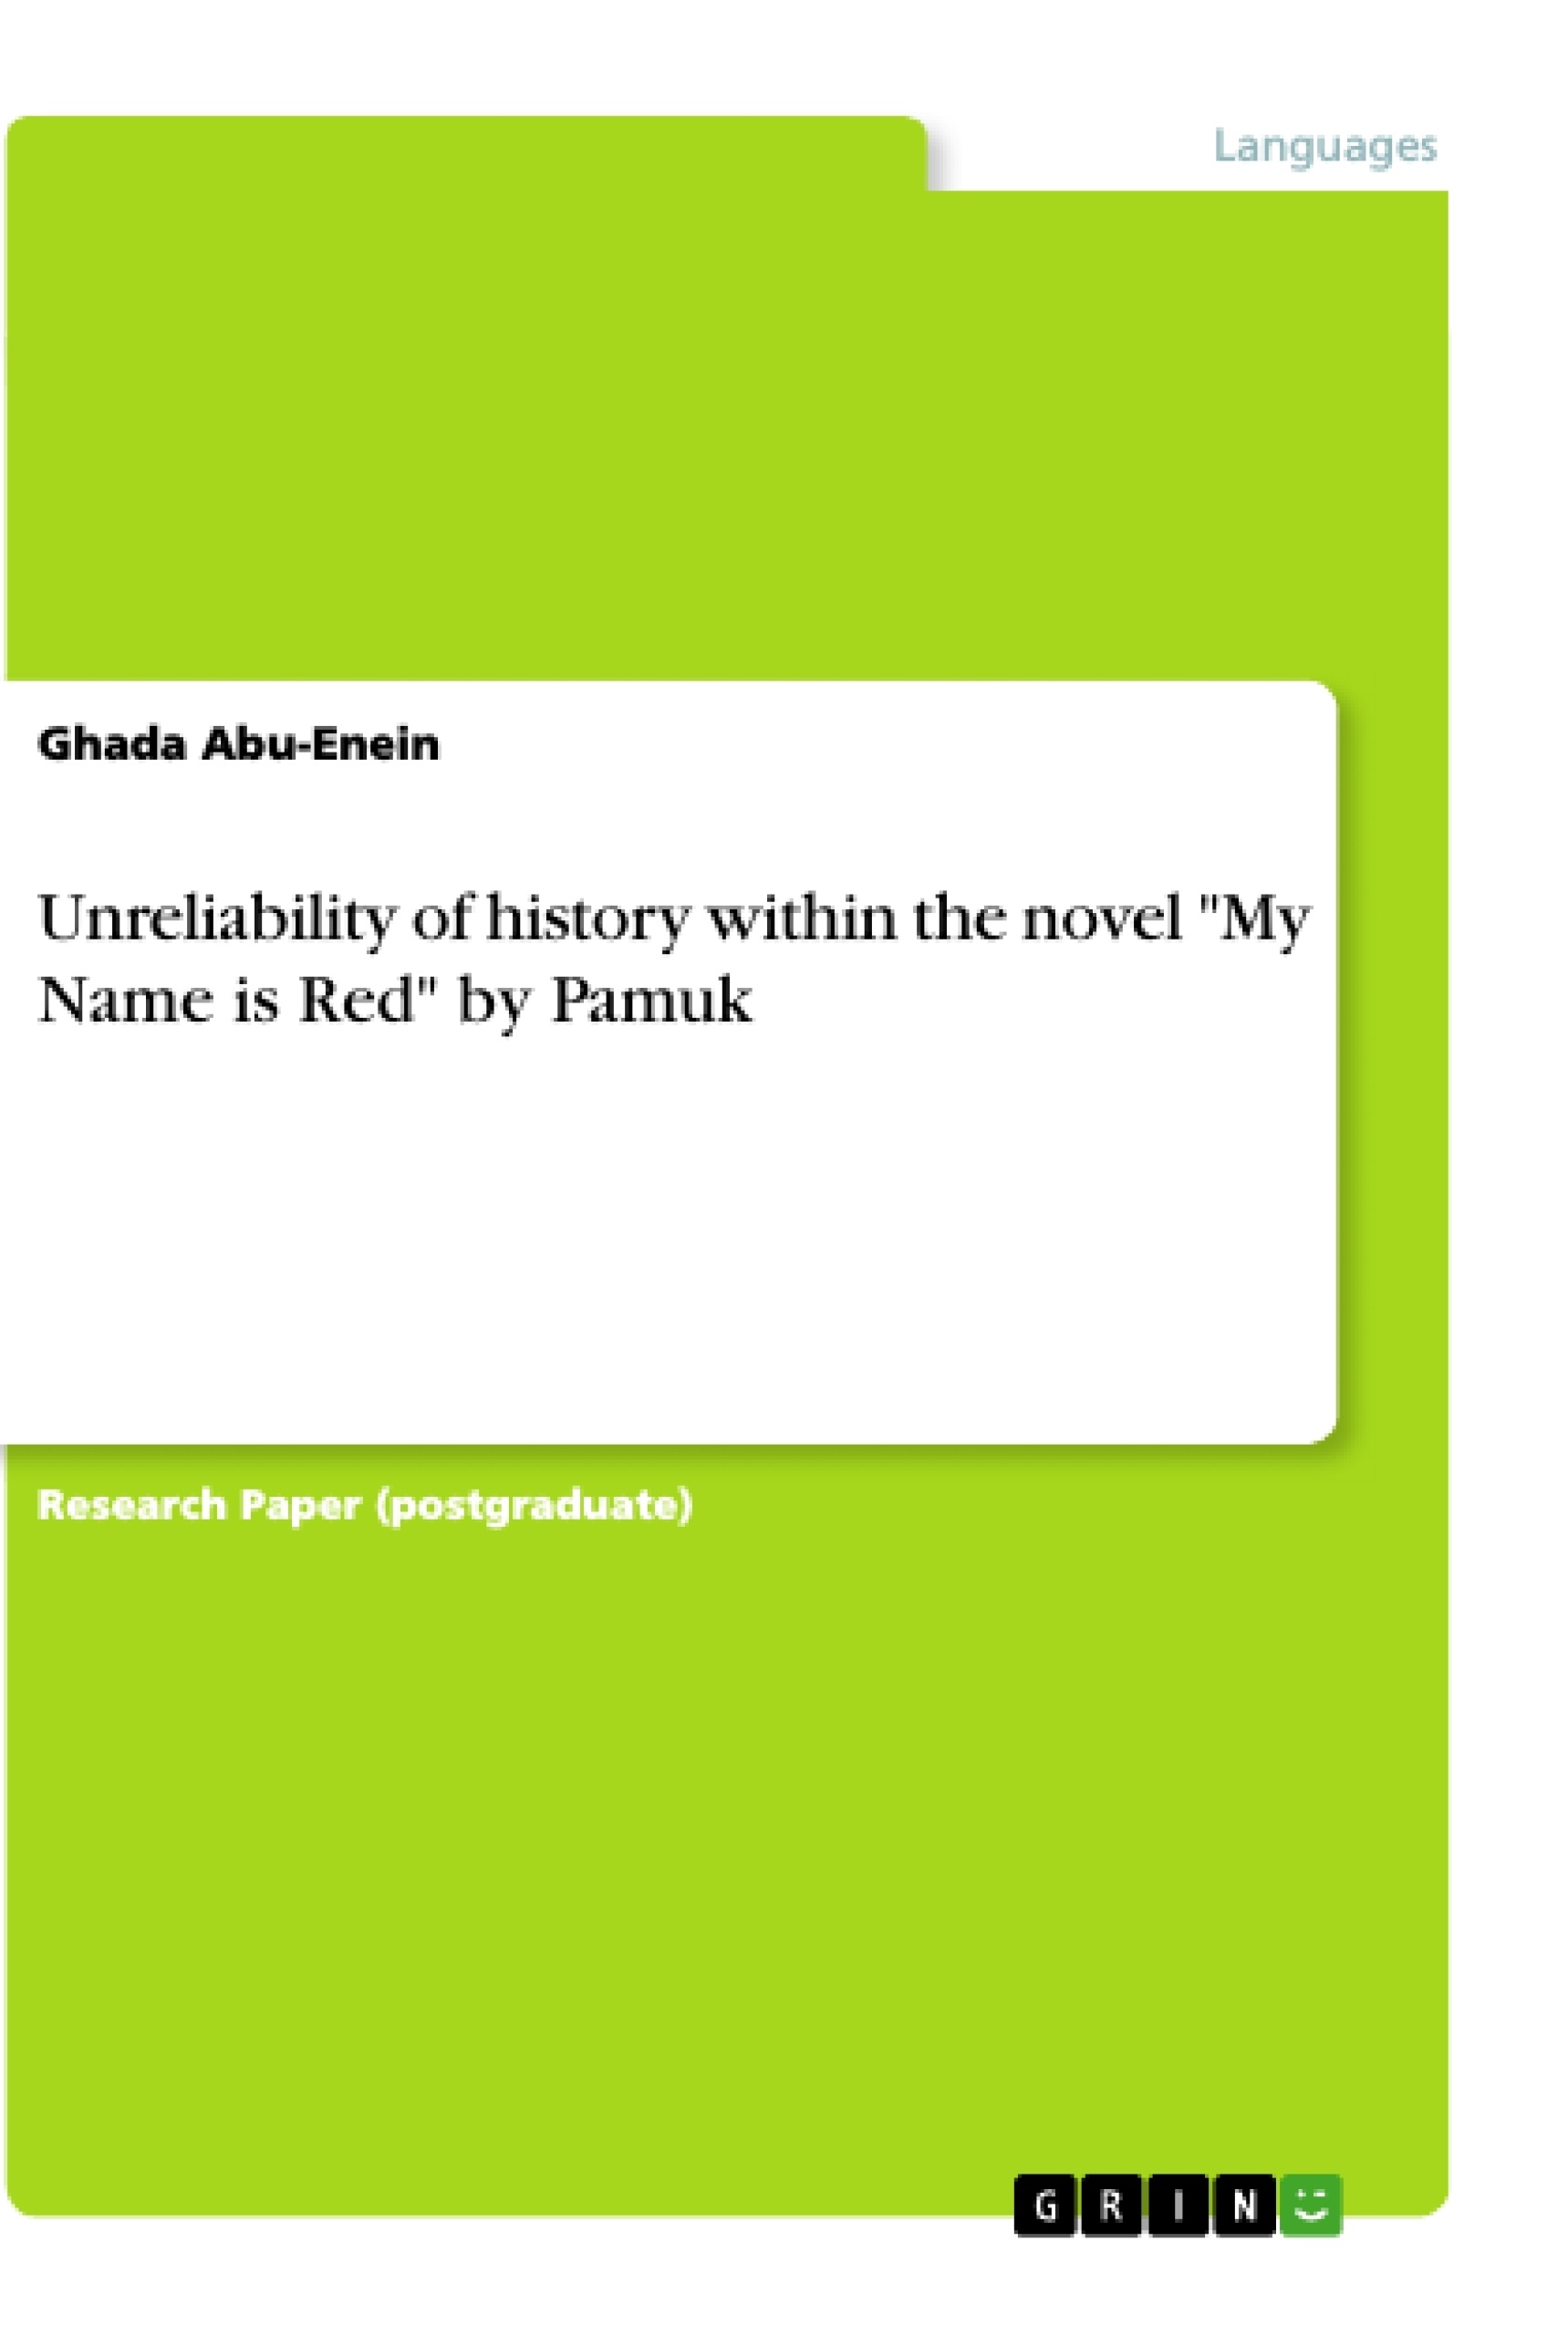 Title: Unreliability of history within the novel "My Name is Red" by Pamuk